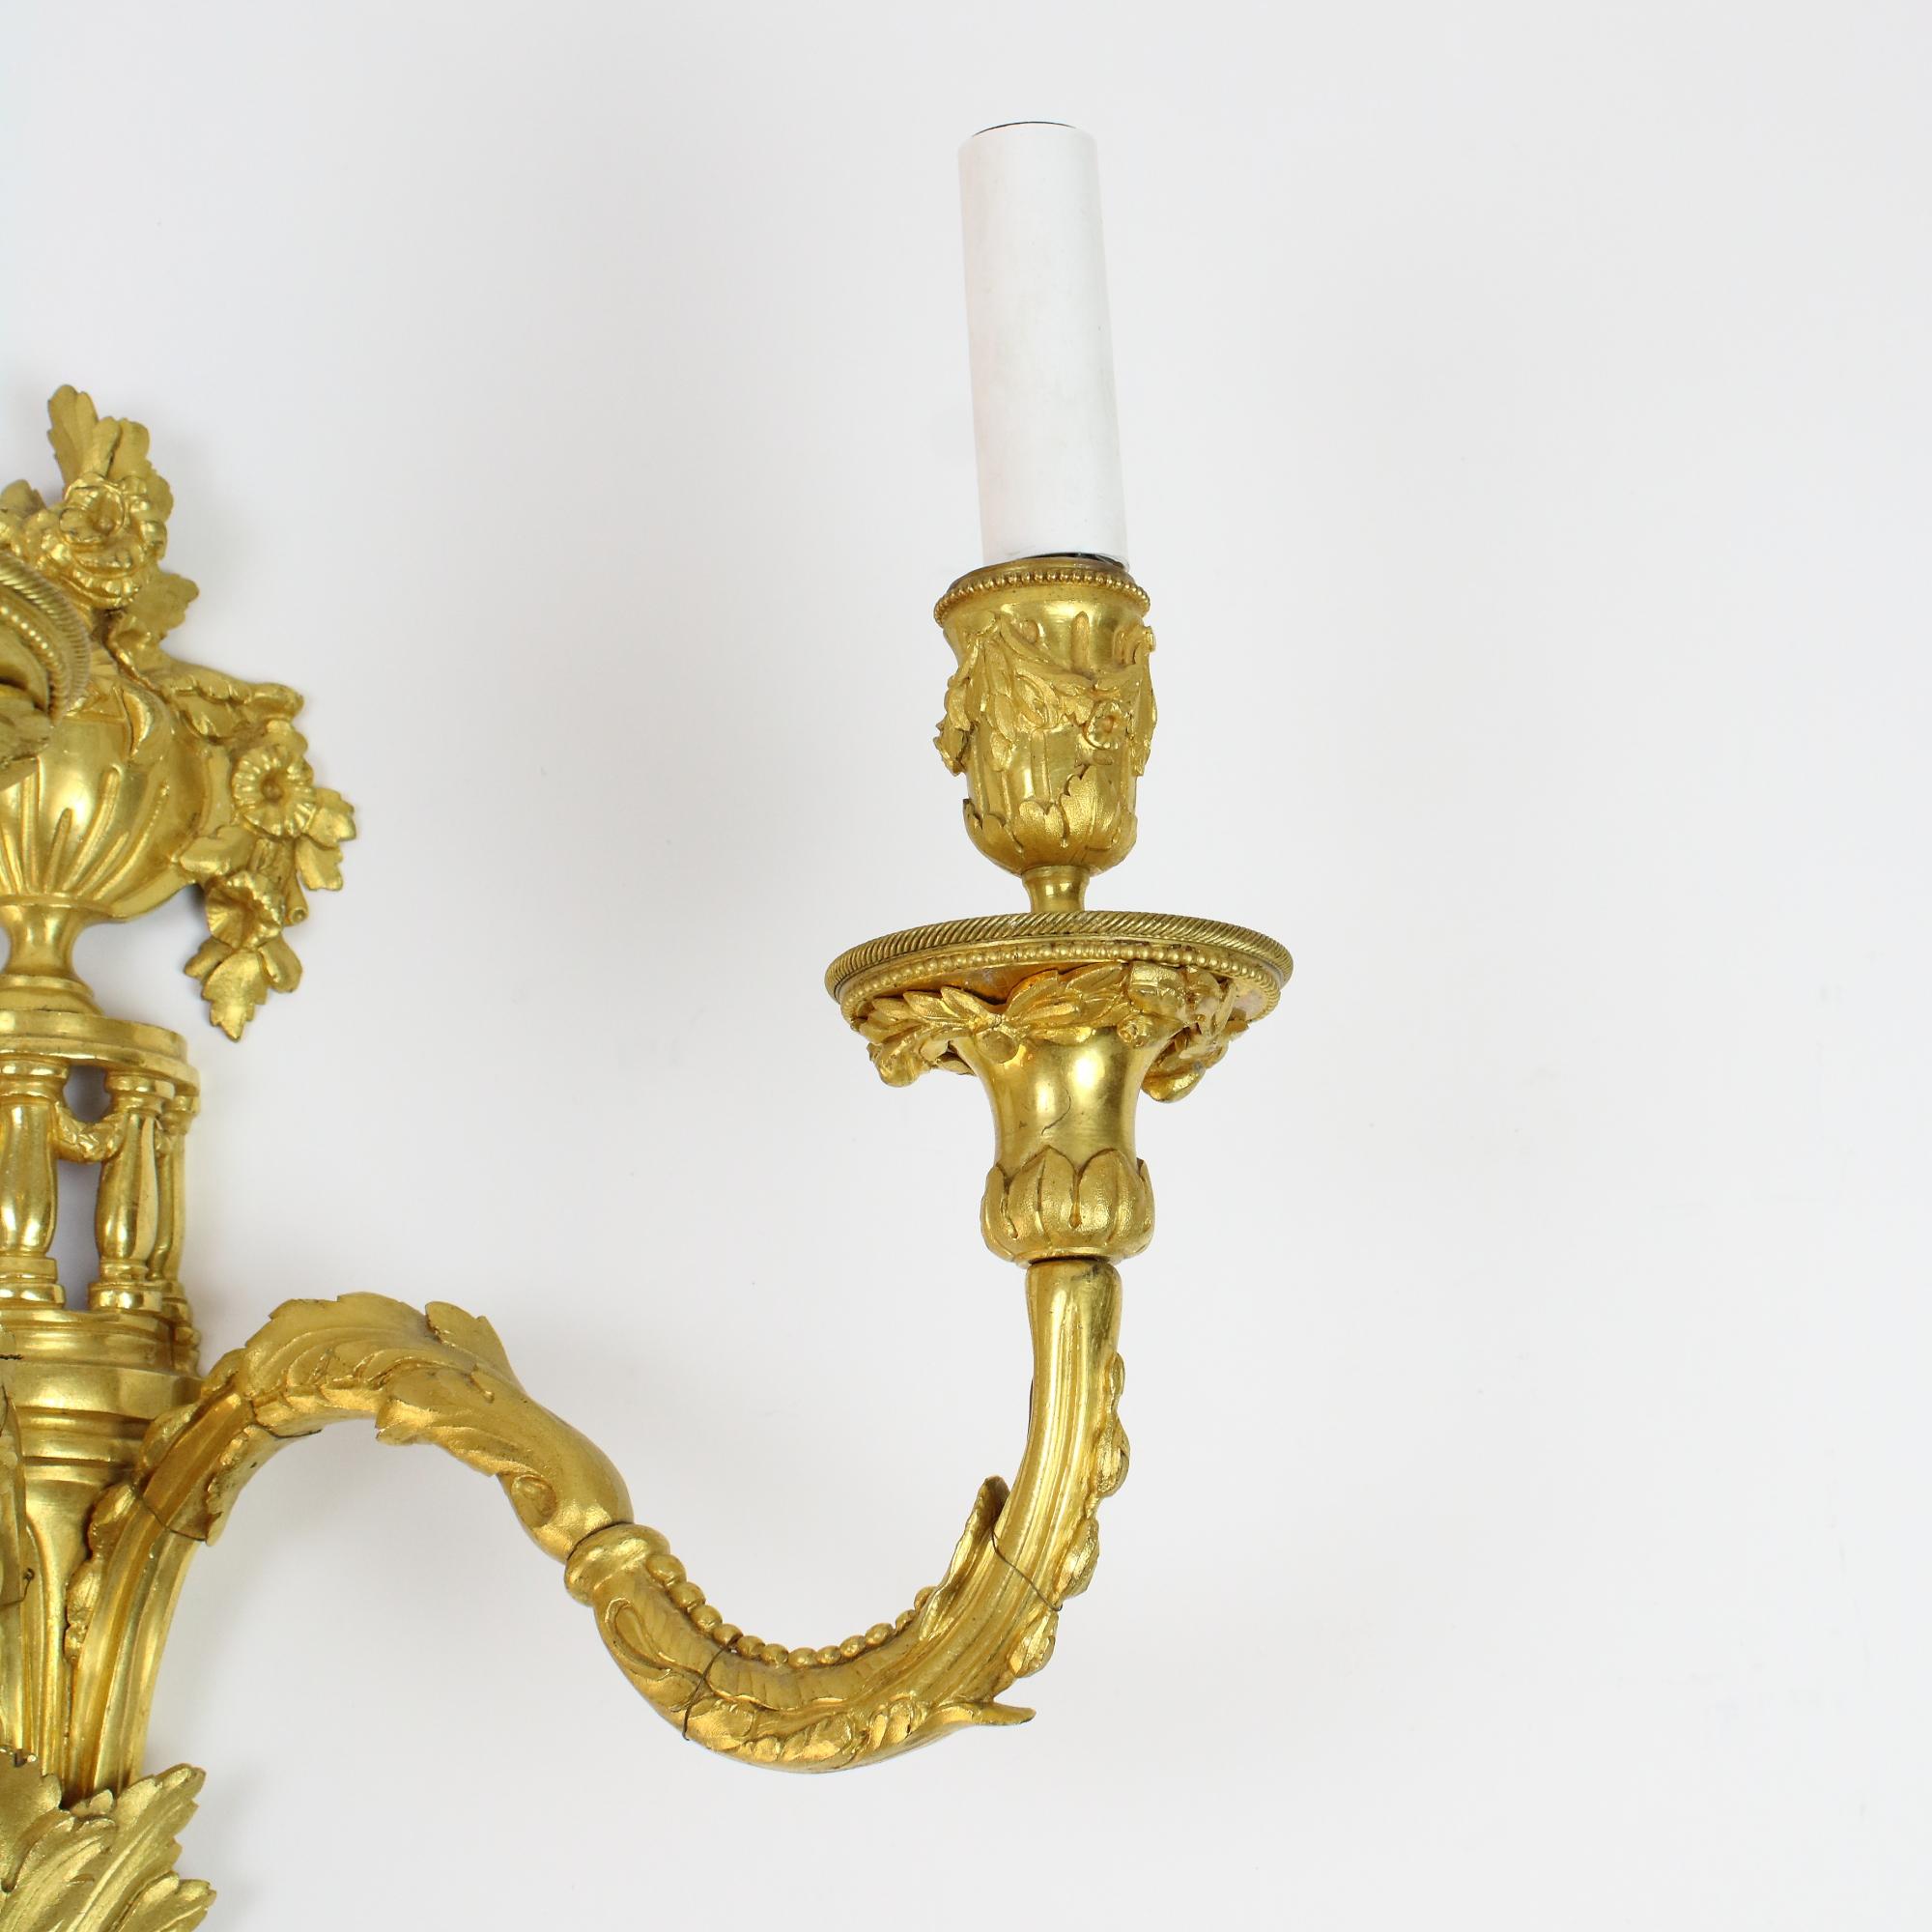 Large Pair of French Louis XVI Gilt Bronze Three-Light Sconces or Wall Lights For Sale 3